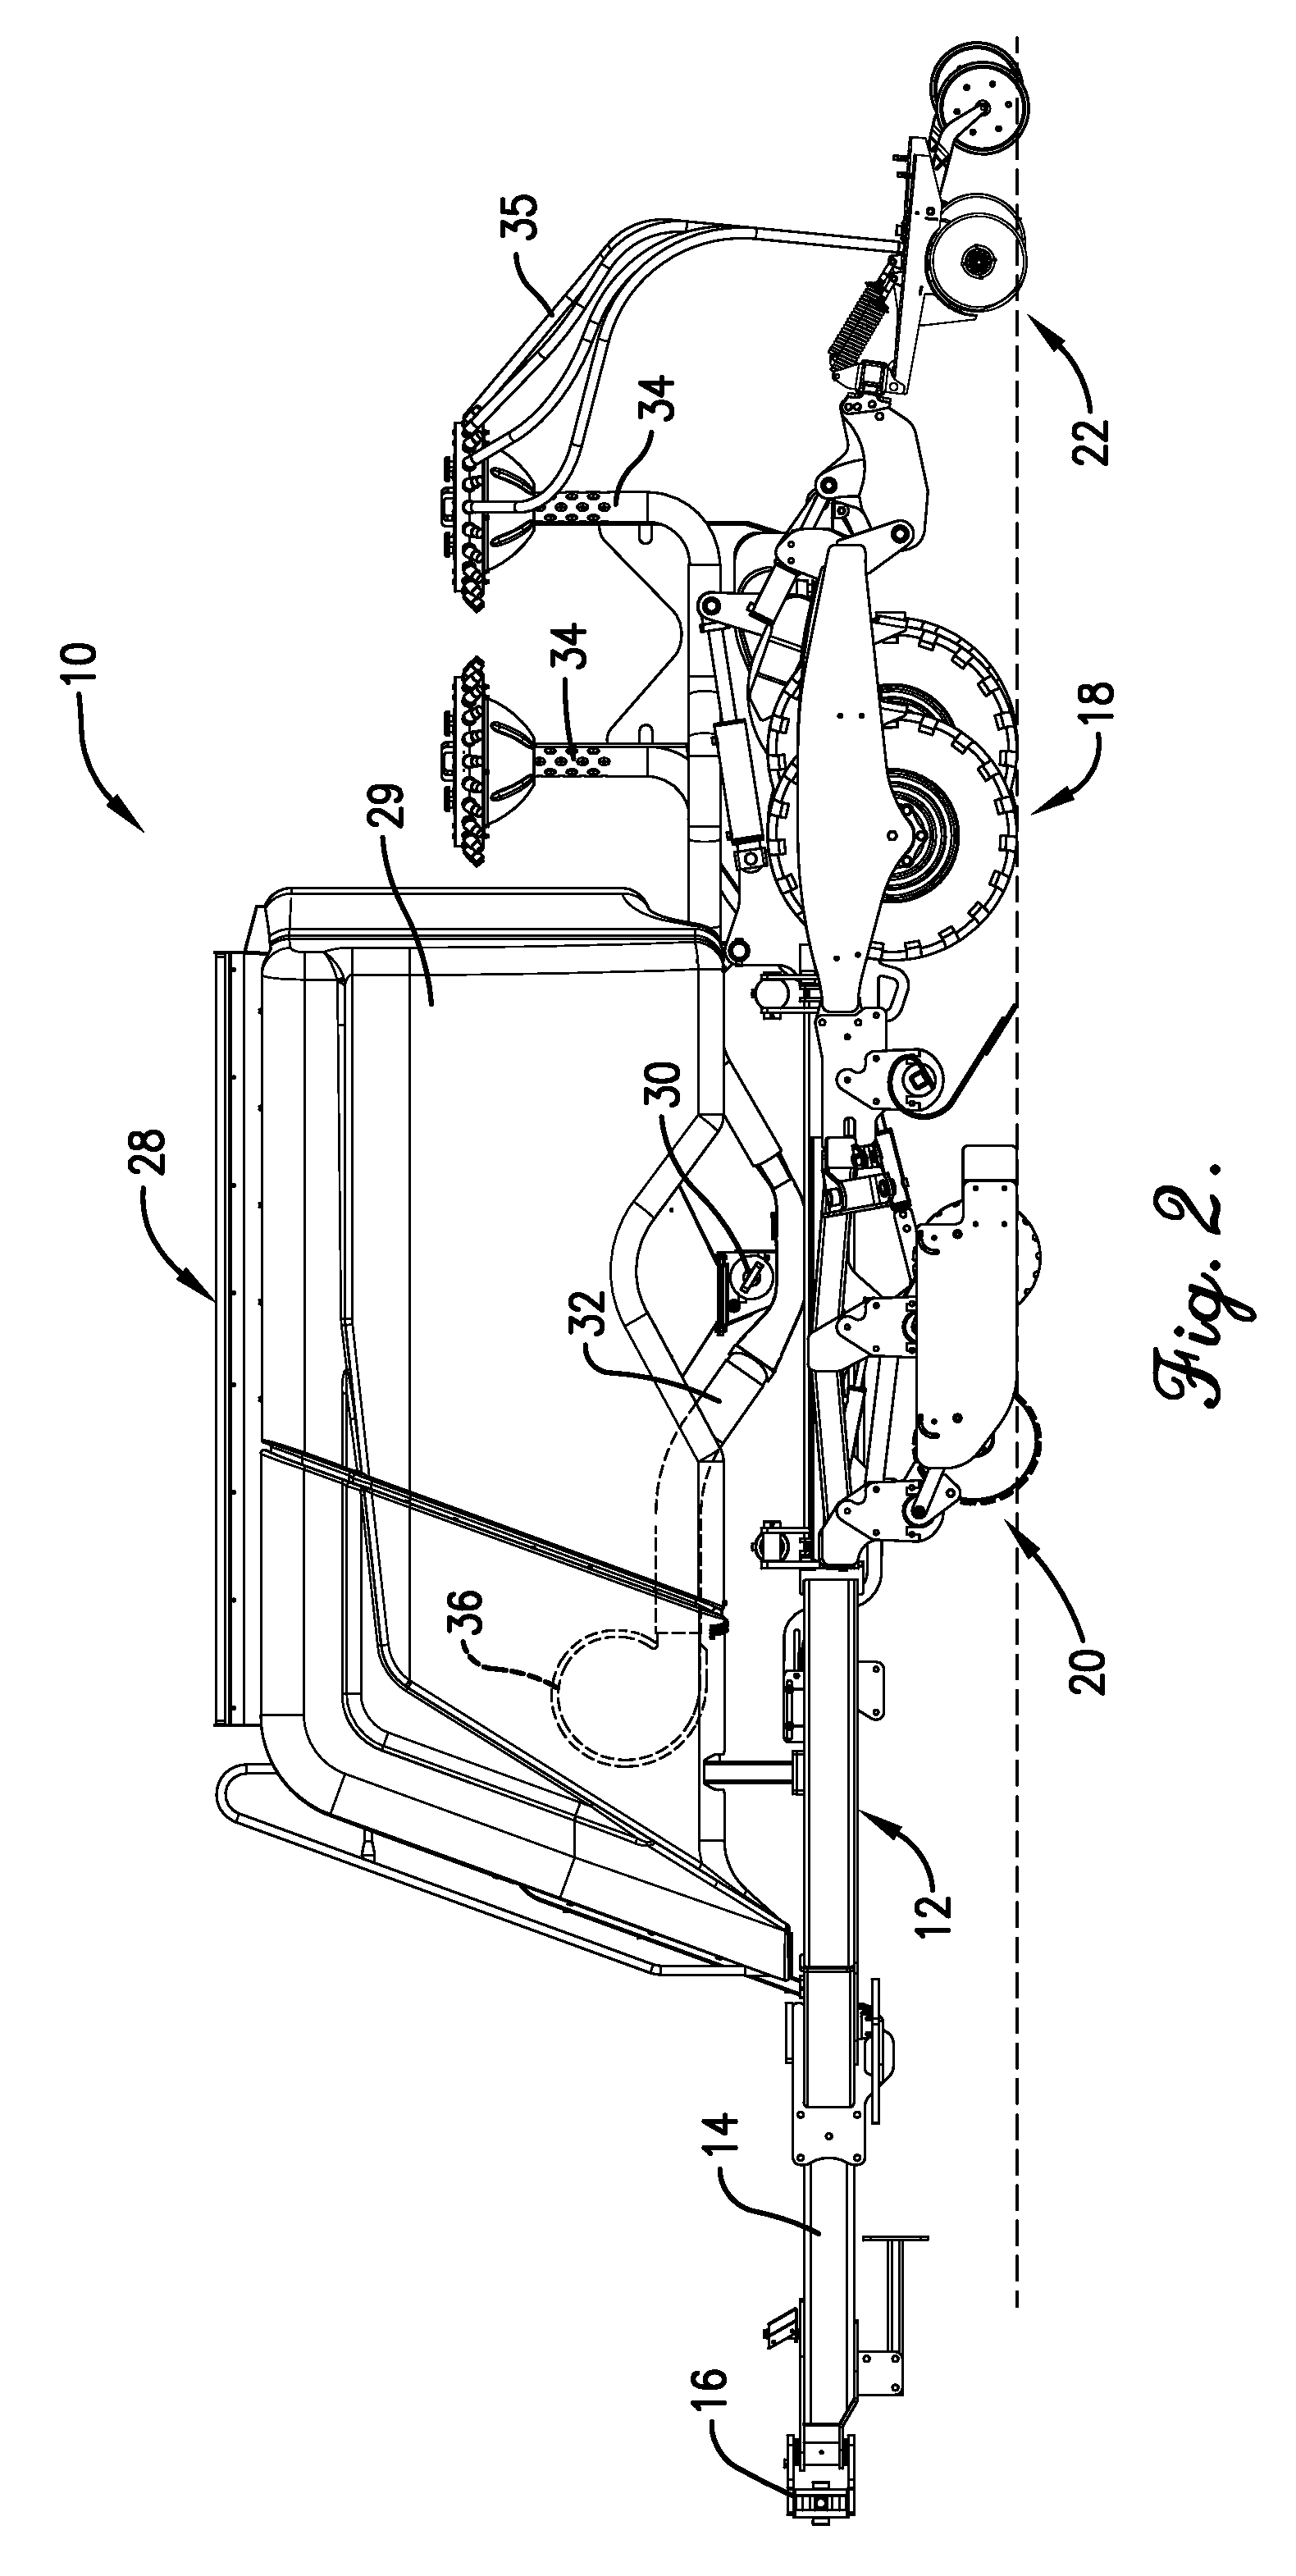 Agricultural implement having hopper weighing system